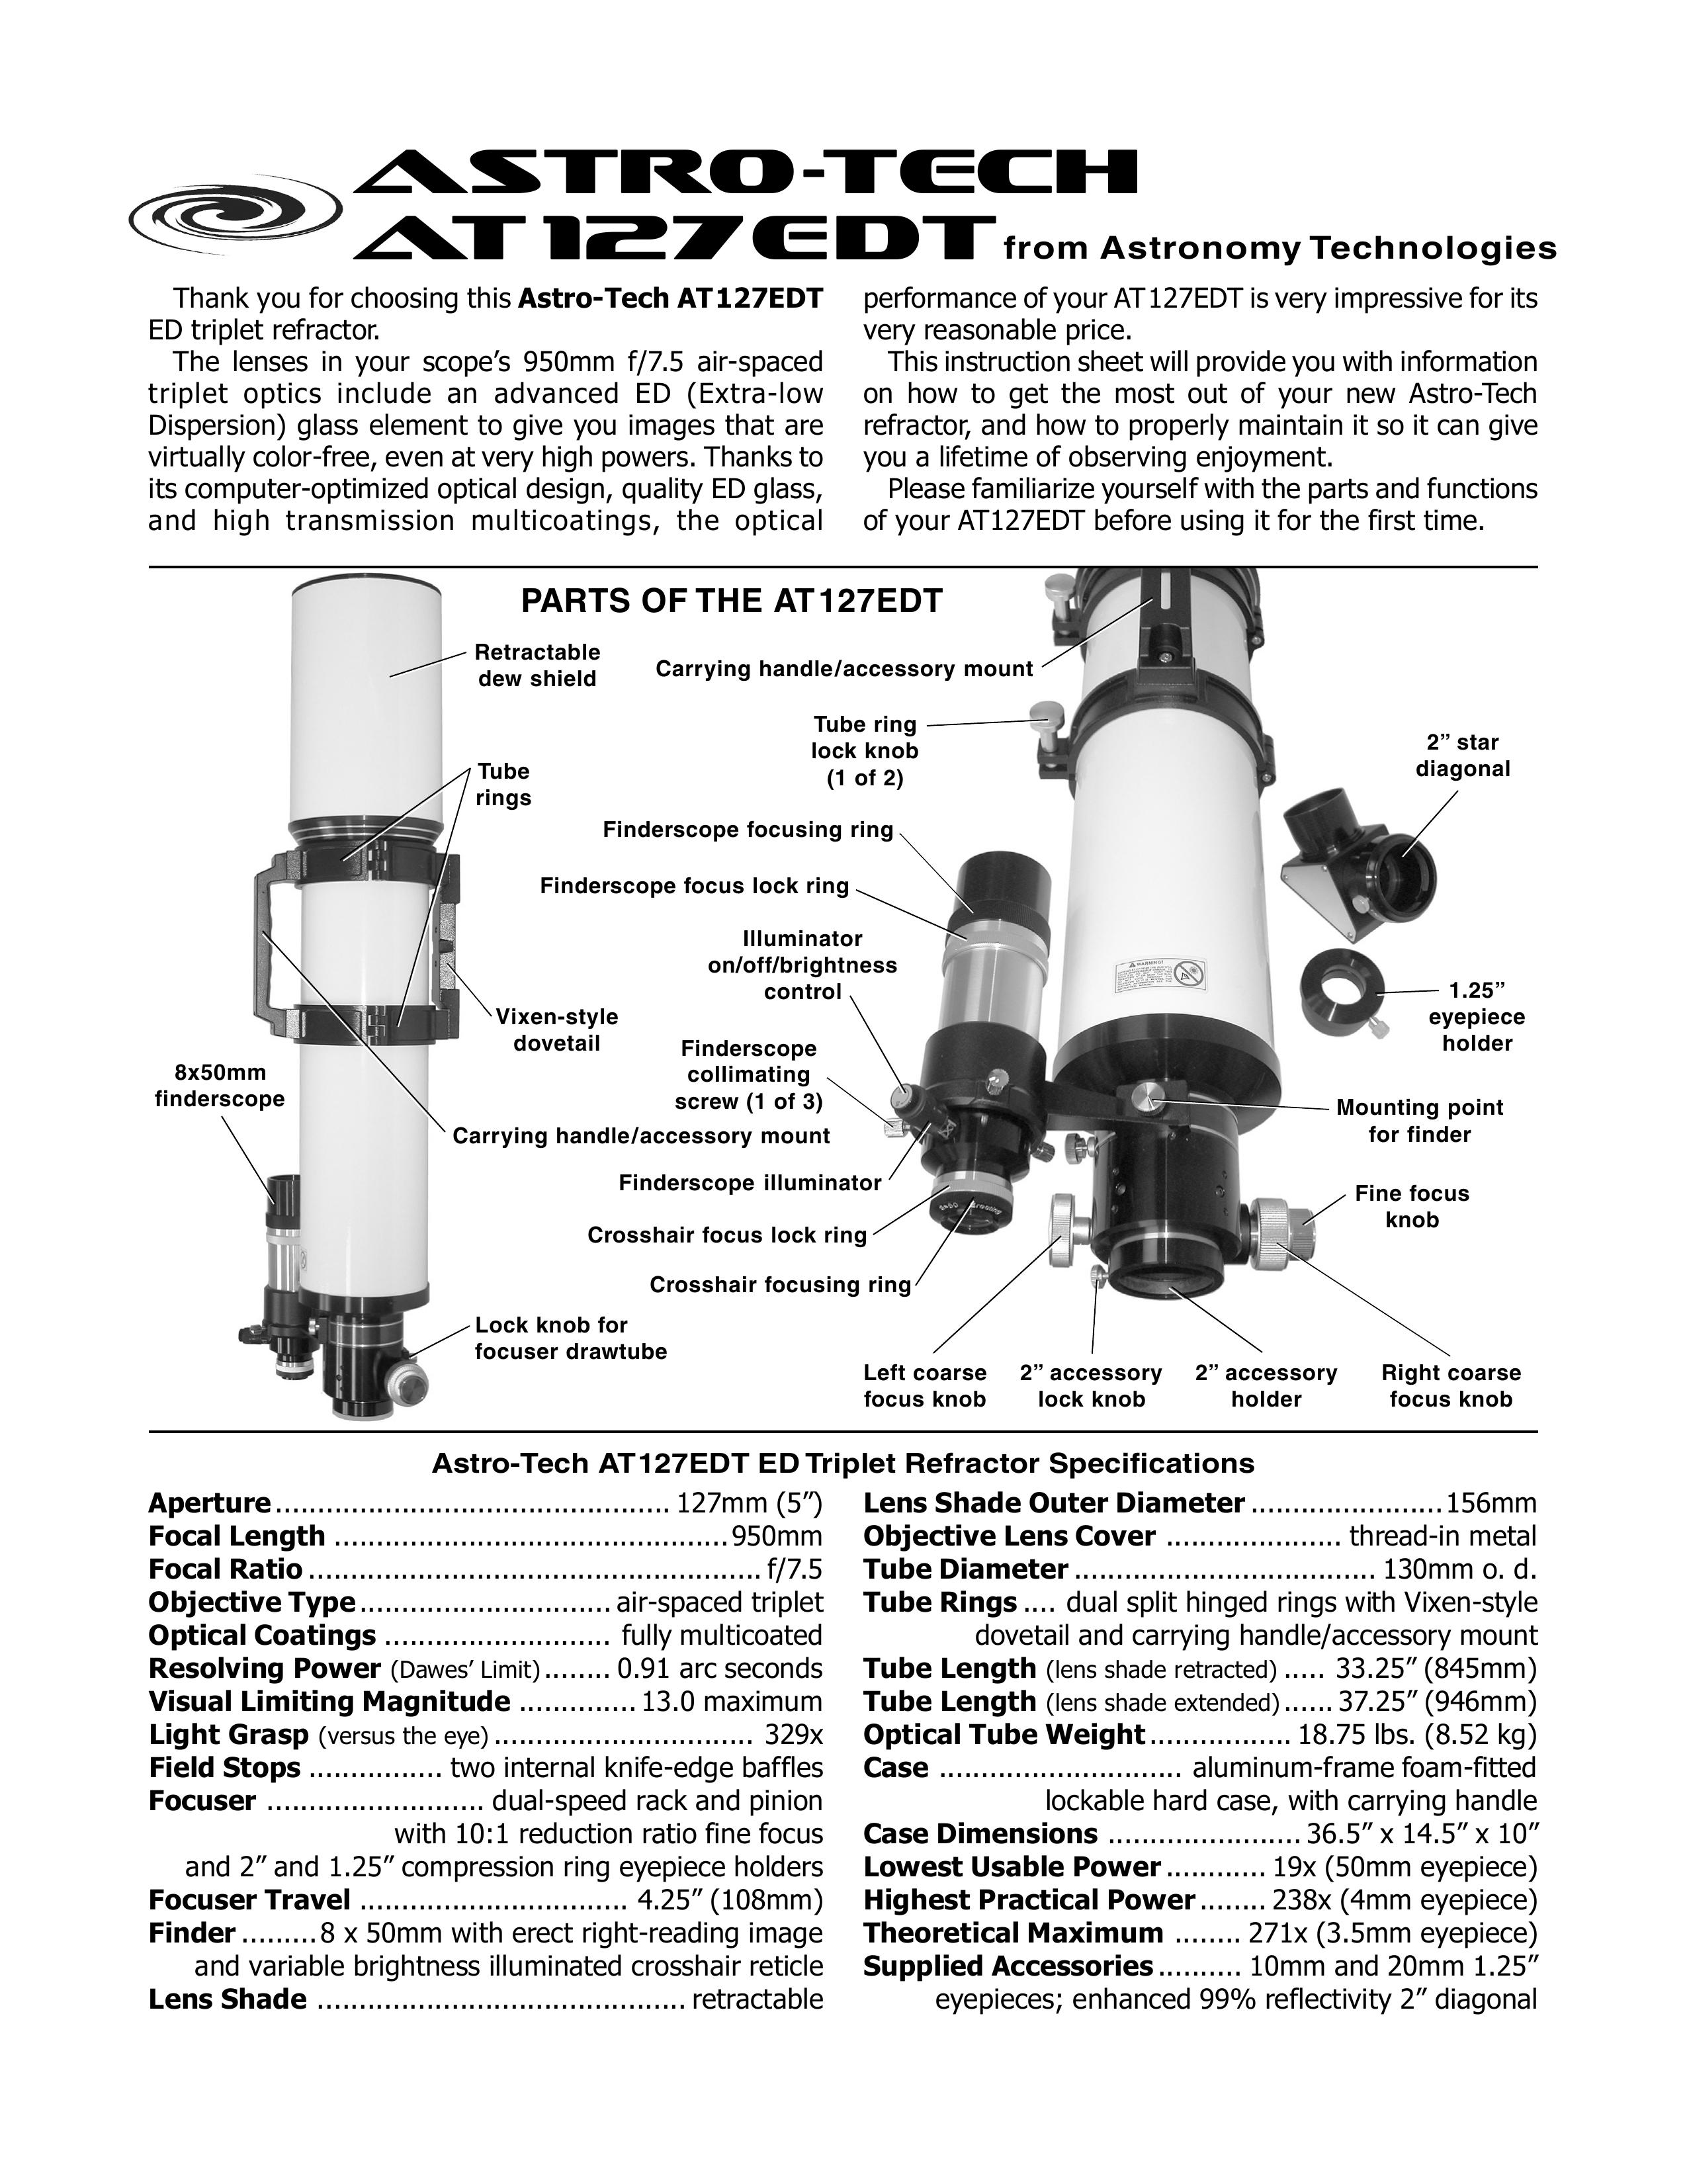 Meade AT 127EDT Telescope User Manual